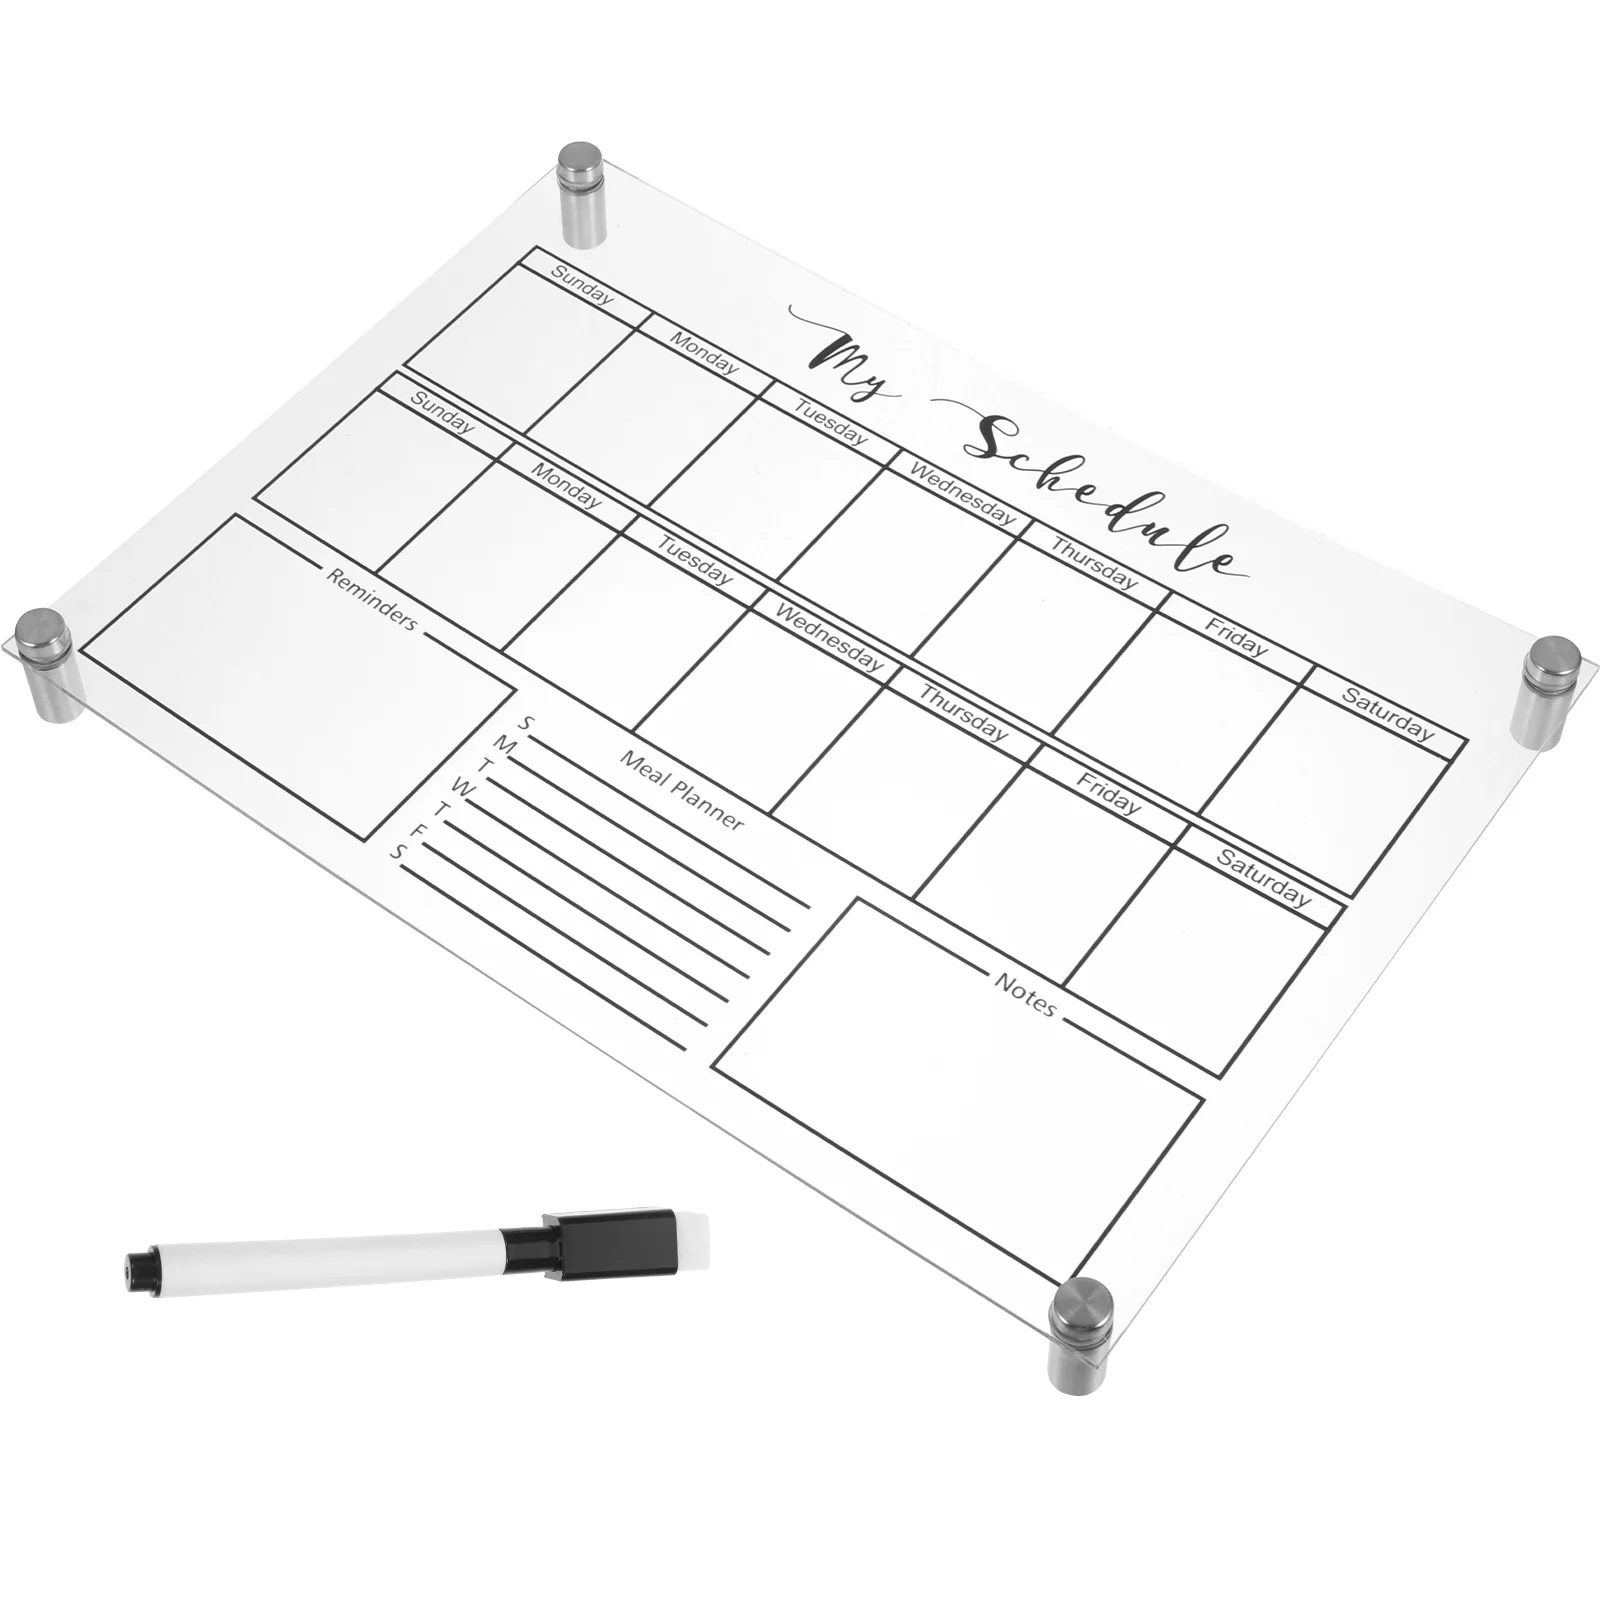 Weekly Planner Board Clear Dry Erase Office Mini Fridge Acrylic Sheet Desk White Write Calendar Magnetic Refrigerator images - 6